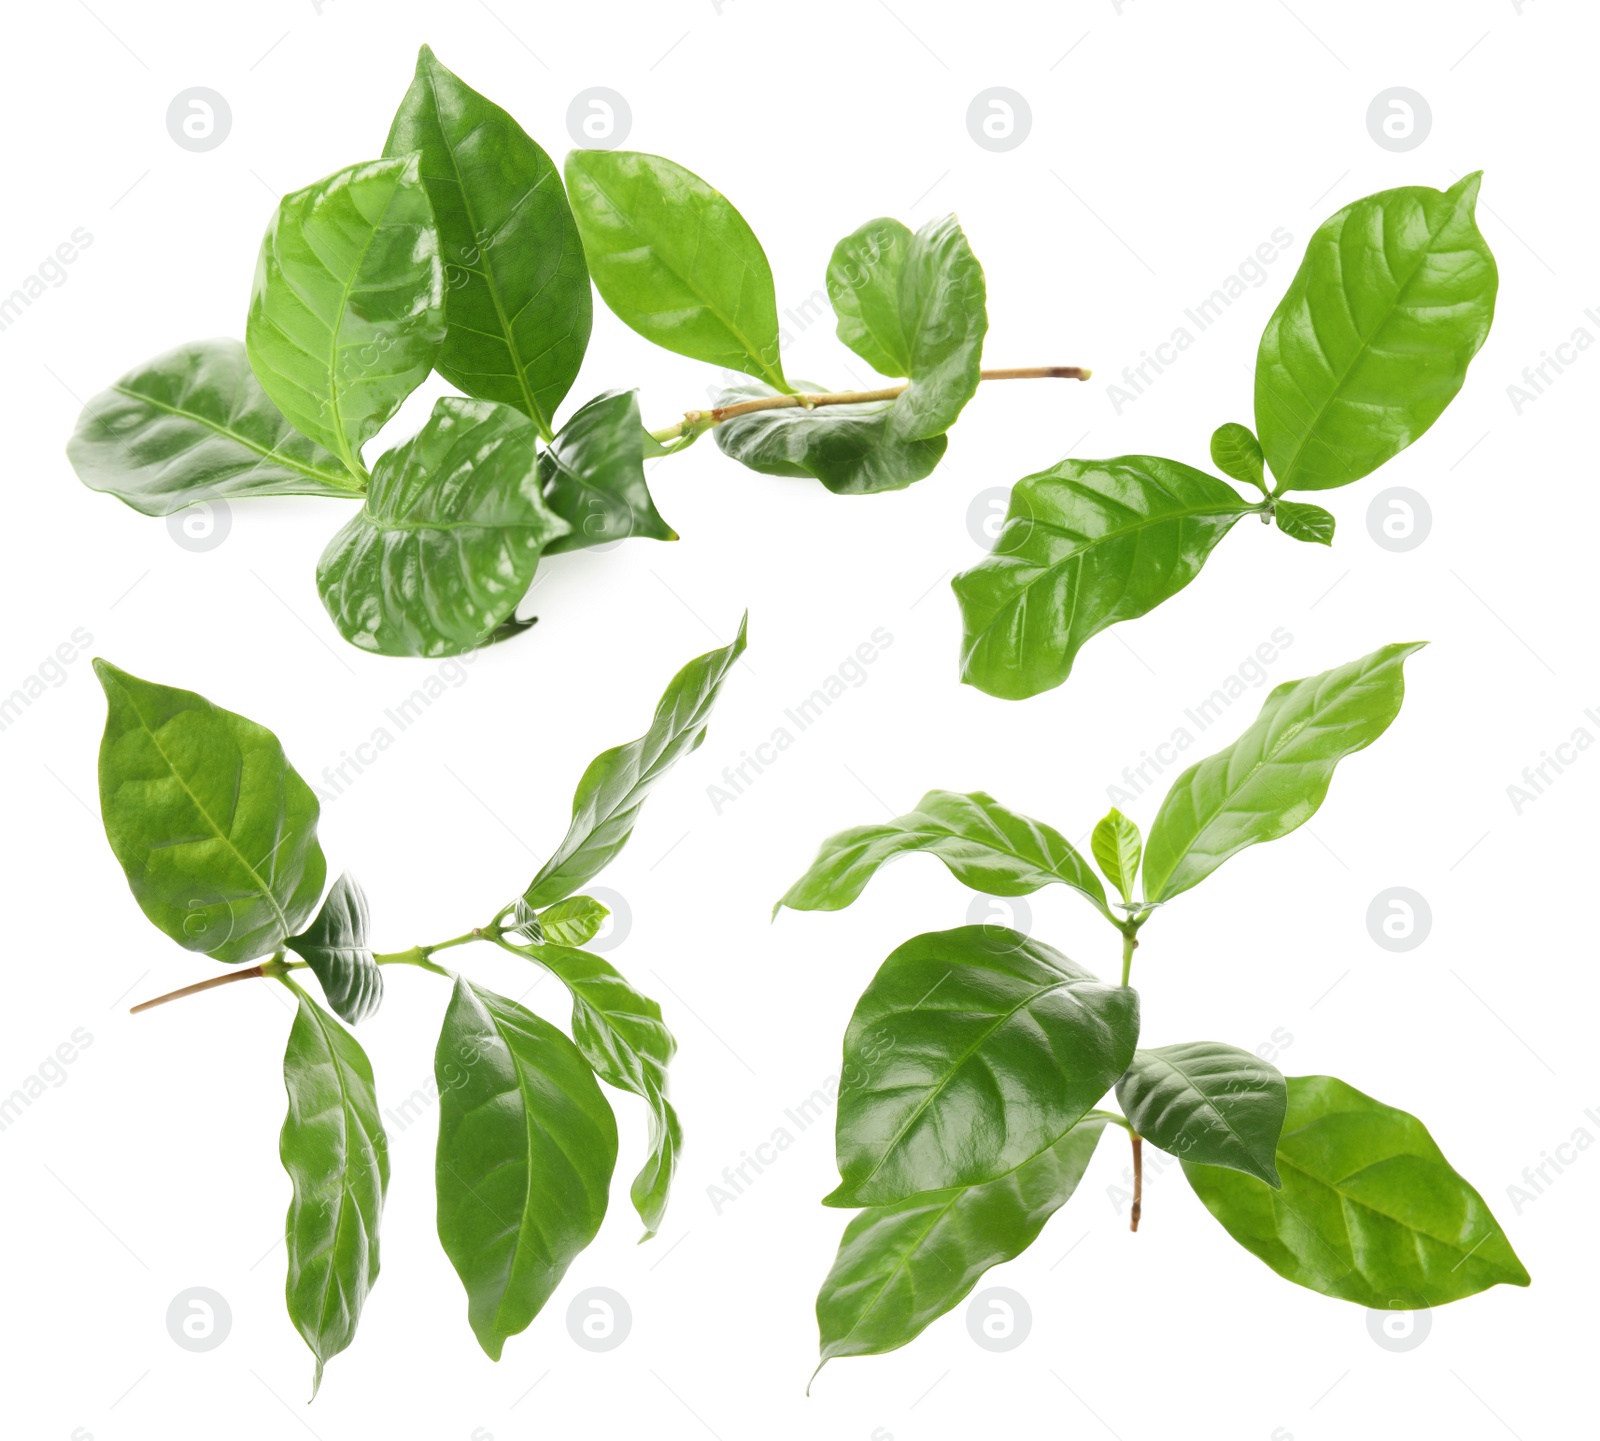 Image of Branches with fresh green leaves of coffee plant on white background, collage